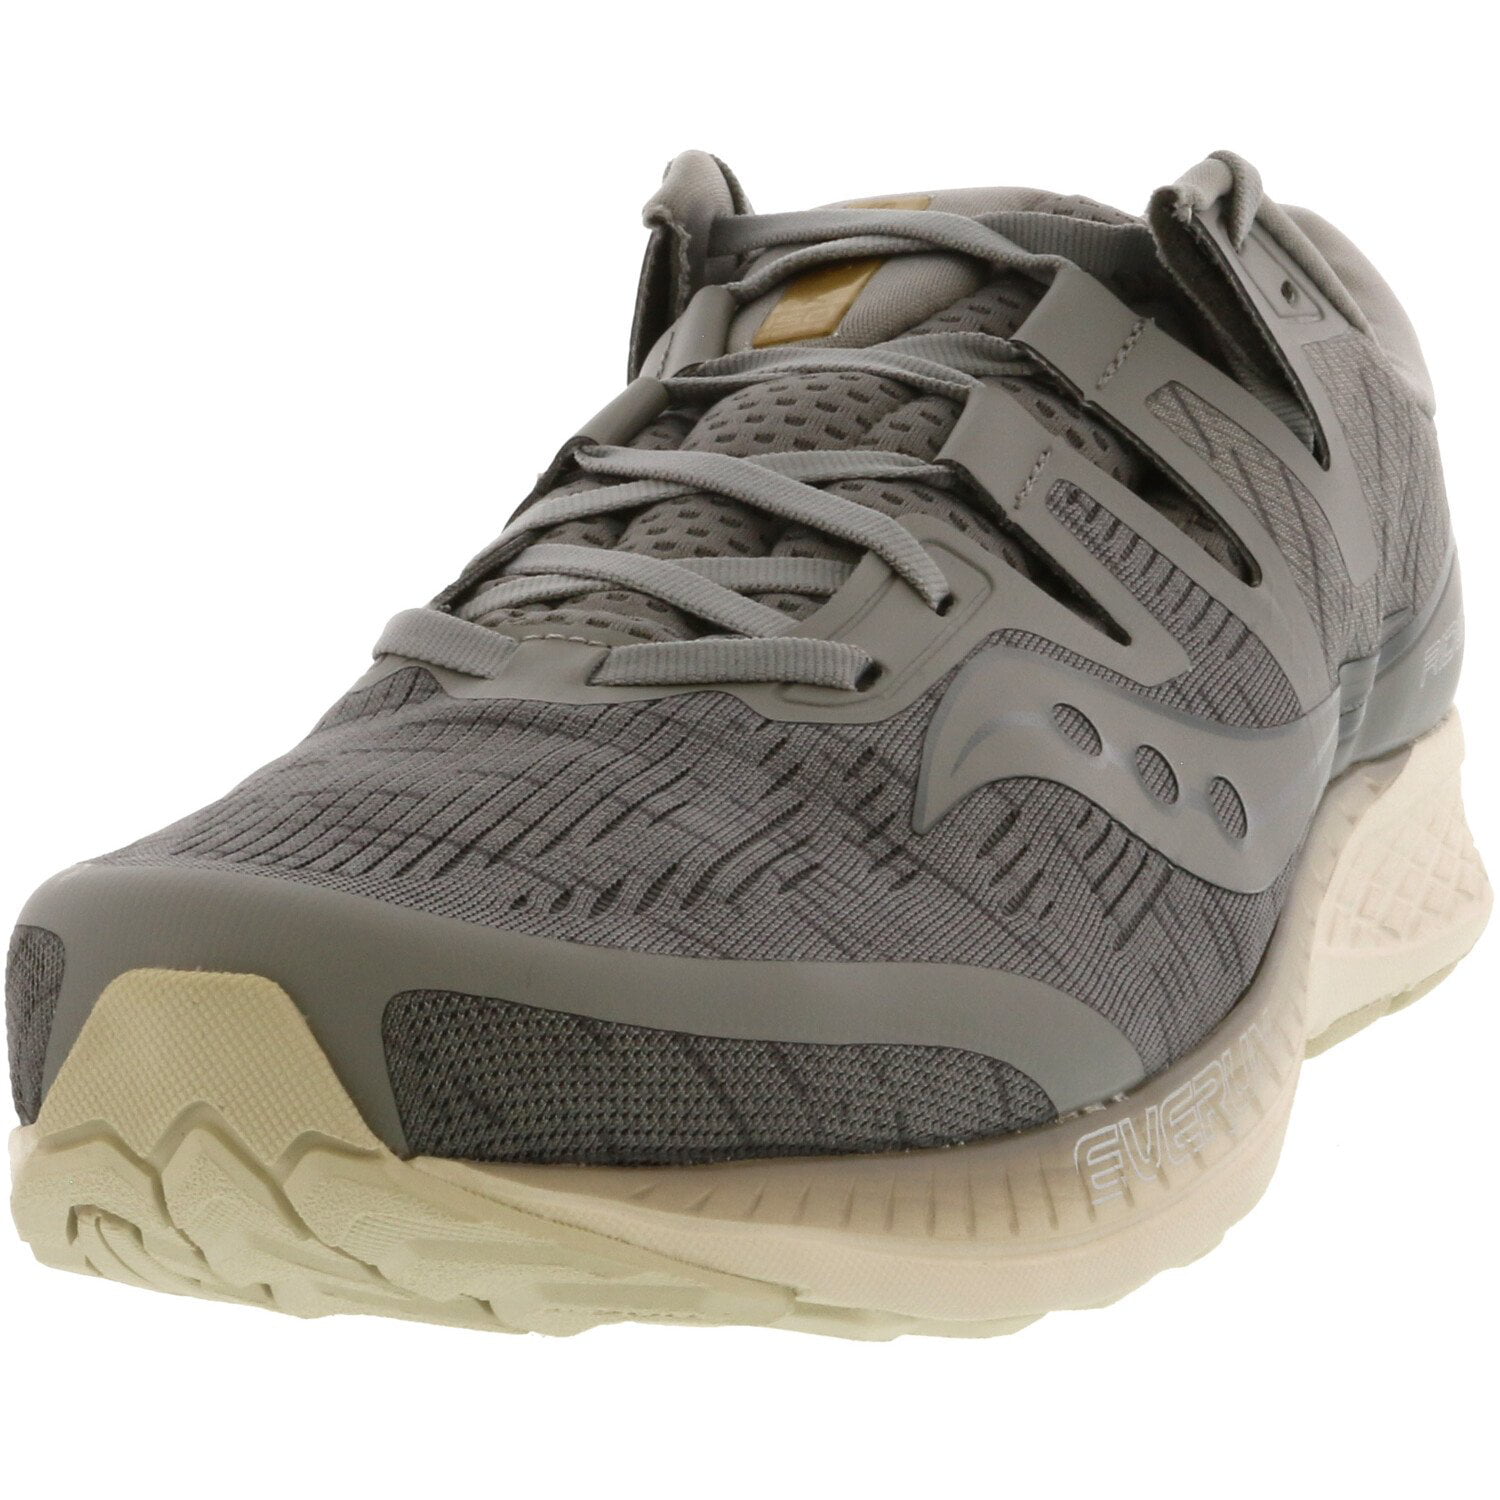 Saucony Men's Ride Iso Grey Shade Ankle-High Running - 11M - Walmart.com